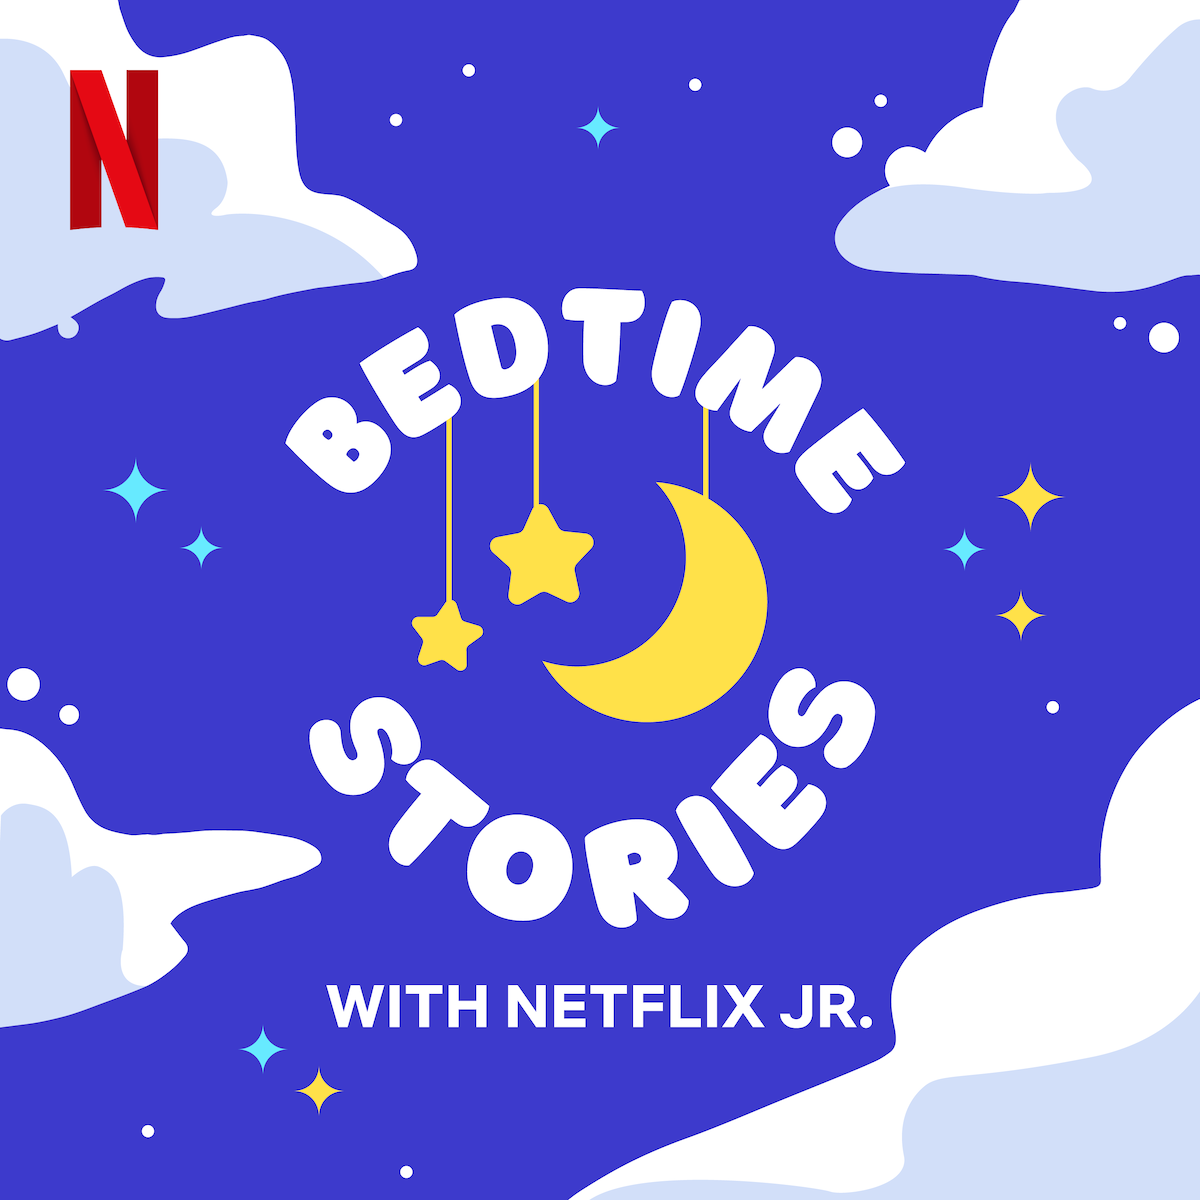 Key art for the Bedtime Stories podcast. An illustration with the words Bedtime Stories, surrounding a half moon and hanging stars.